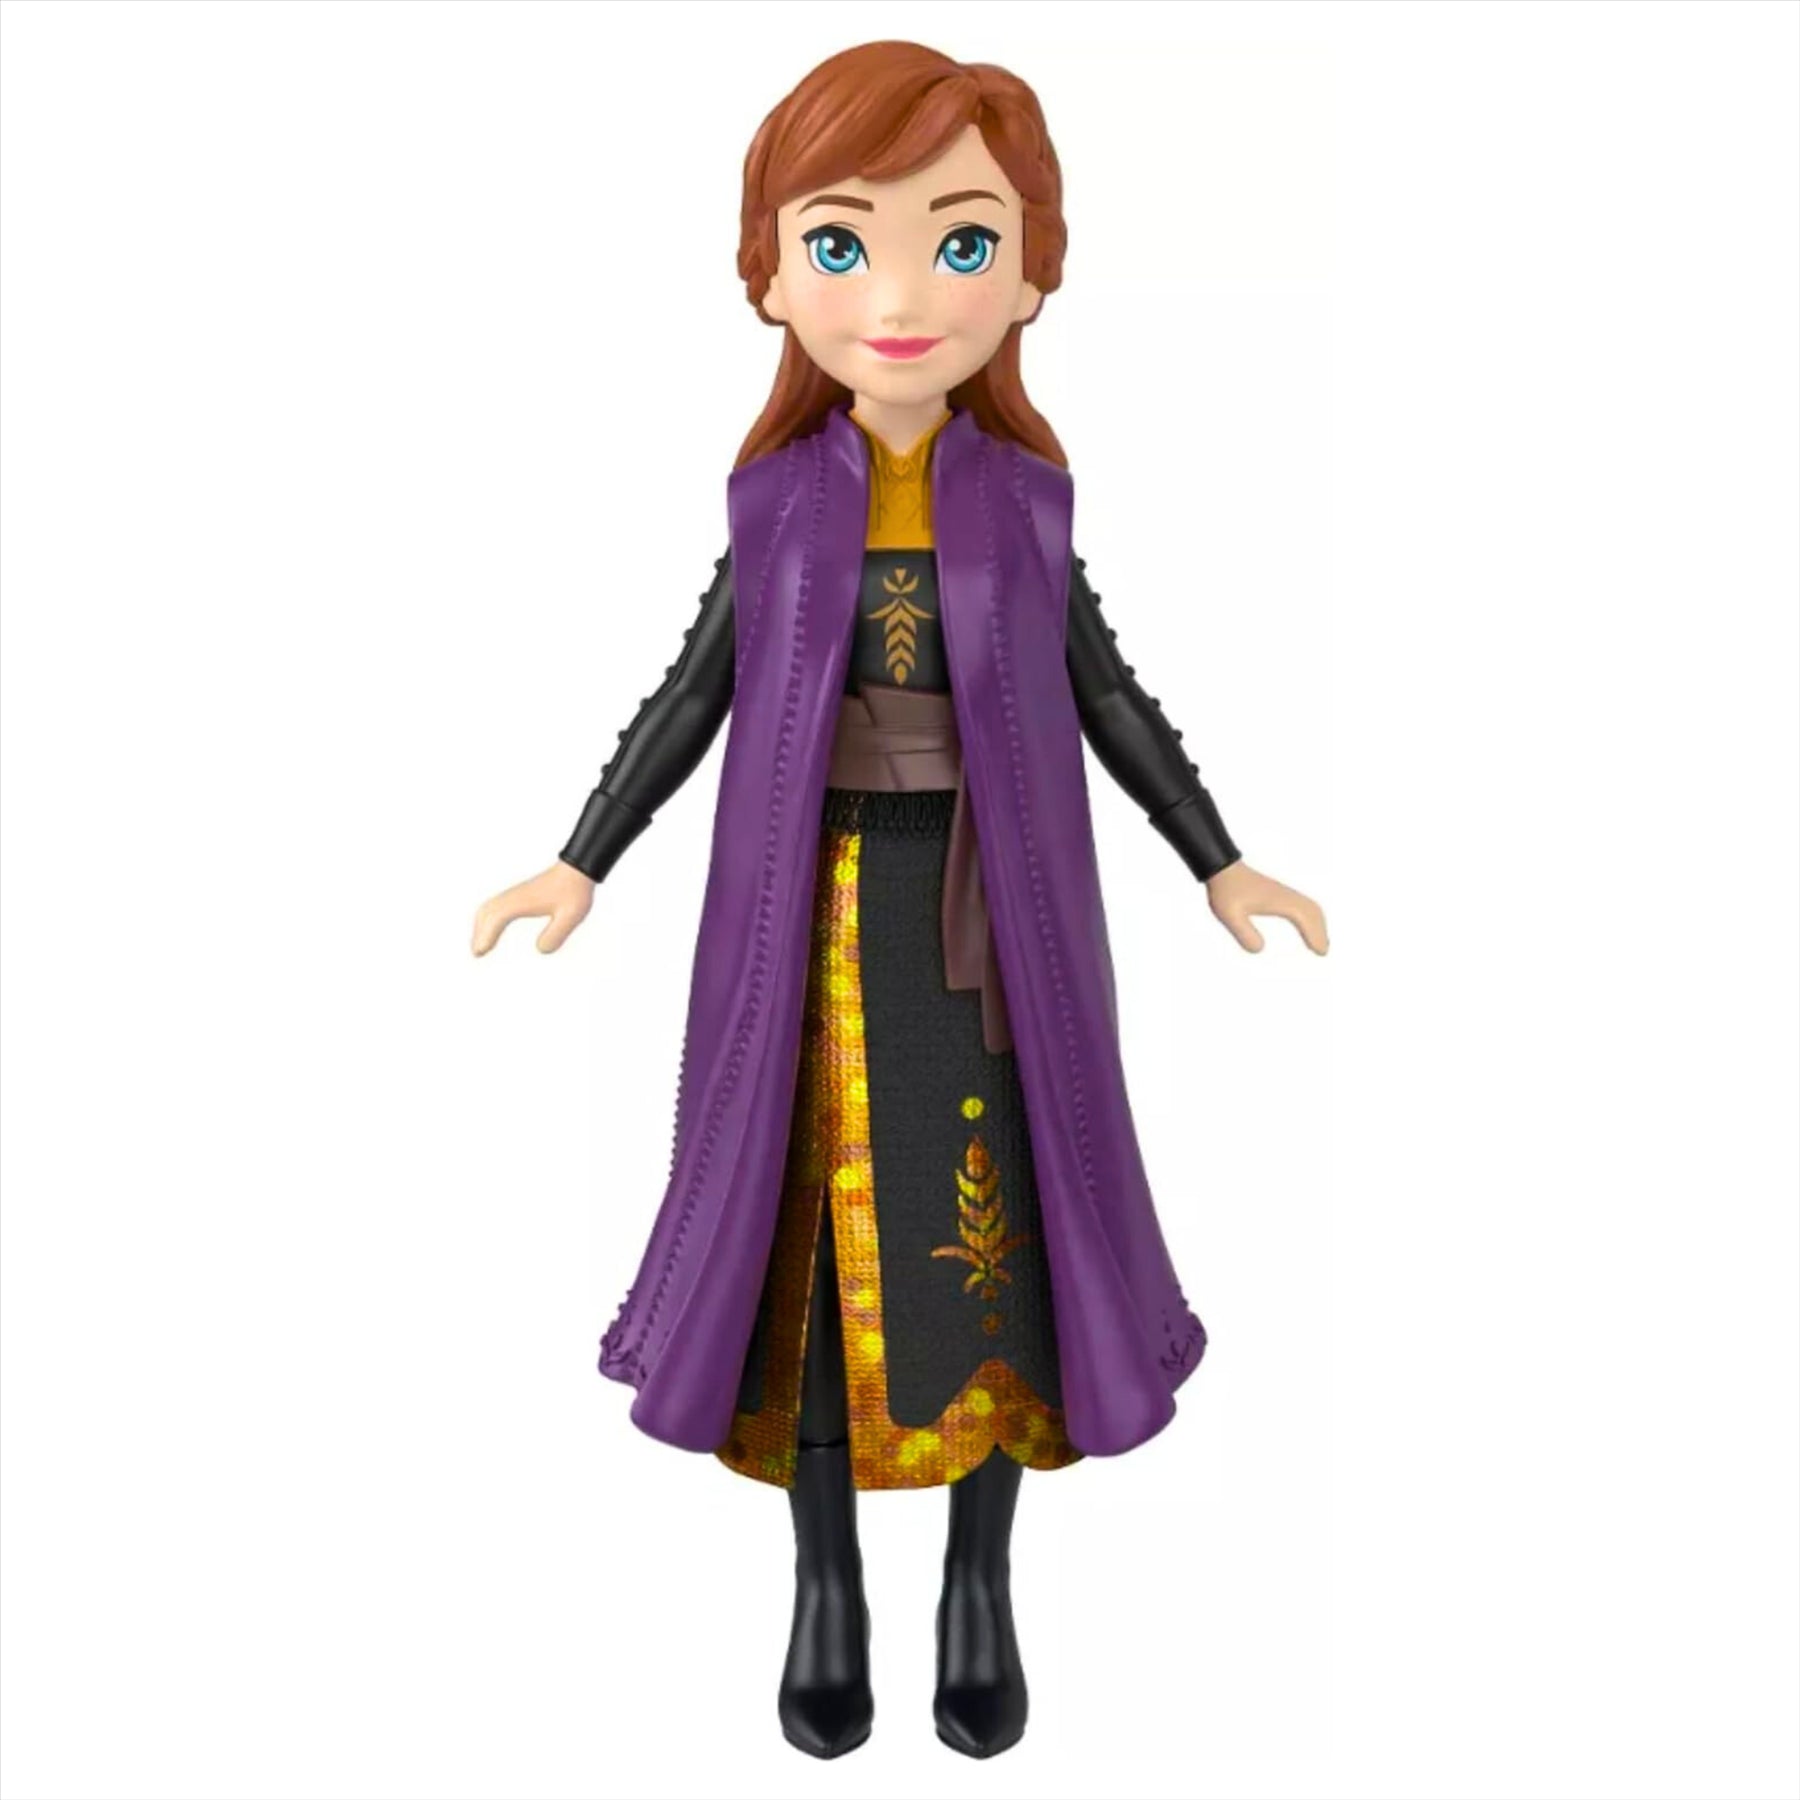 Disney Frozen Anna 10cm Articulated Action Figure Play Toy